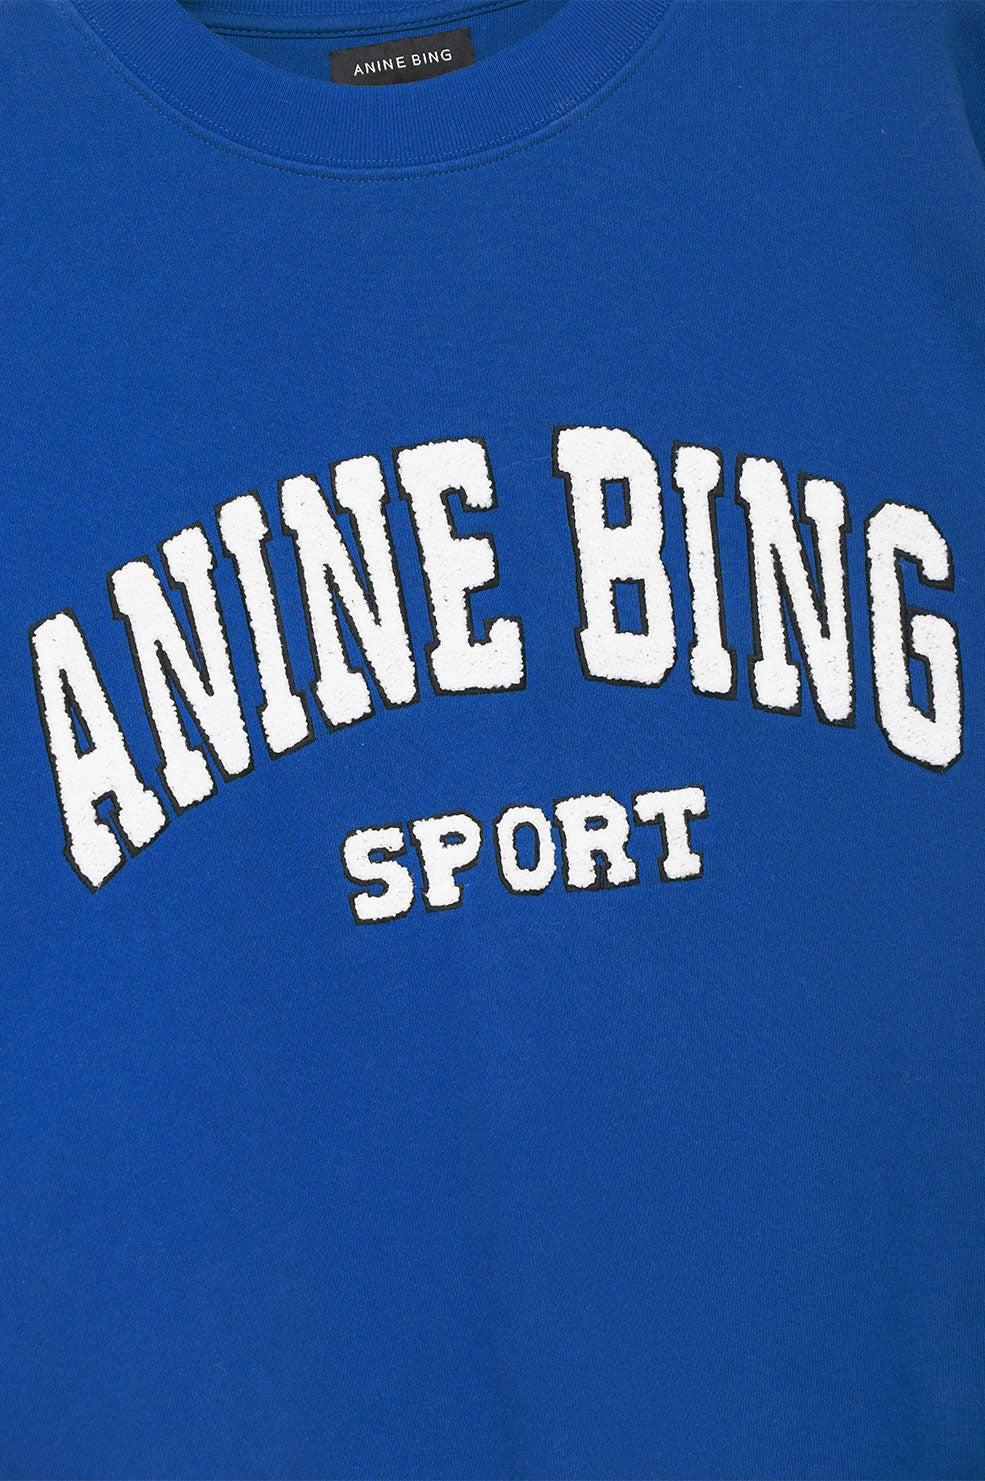 Emia  Tyler Hoodie from #aninebingsport has been re-stocked in